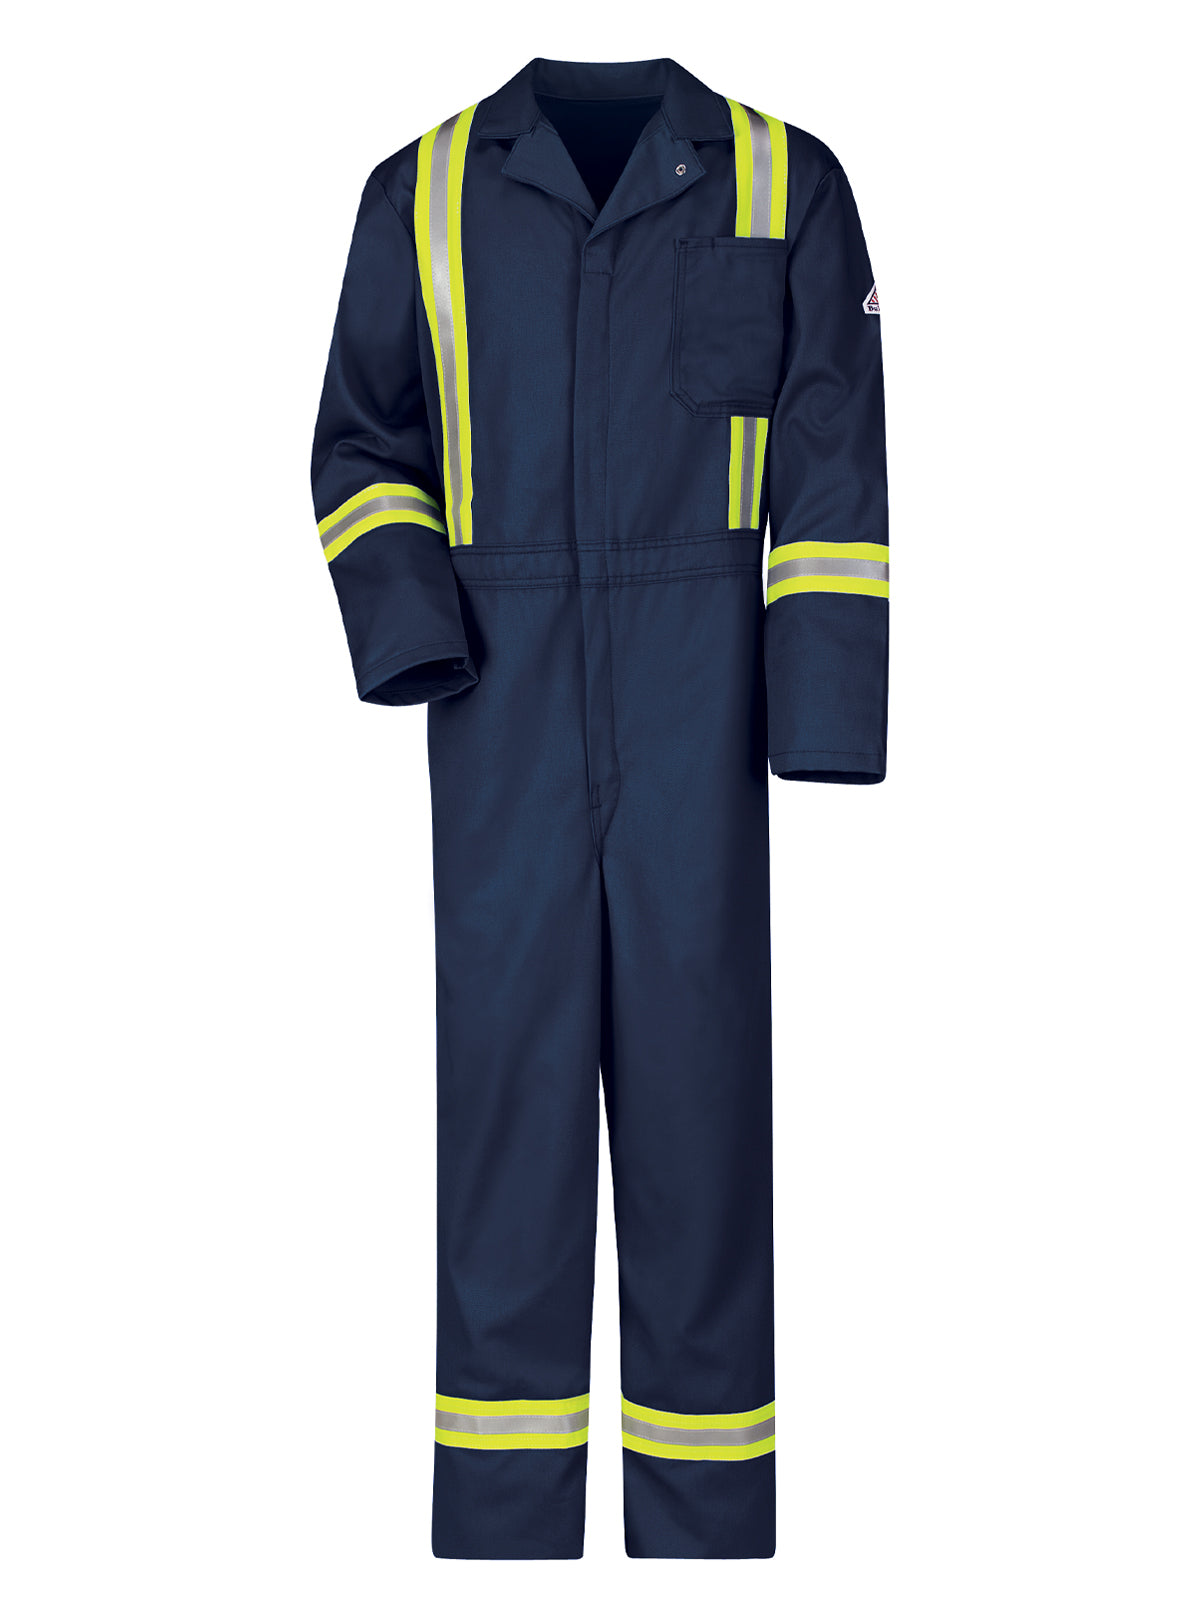 Men's Midweight Excel Flame-Resistant Reflective Classic Coverall - CECT - Navy